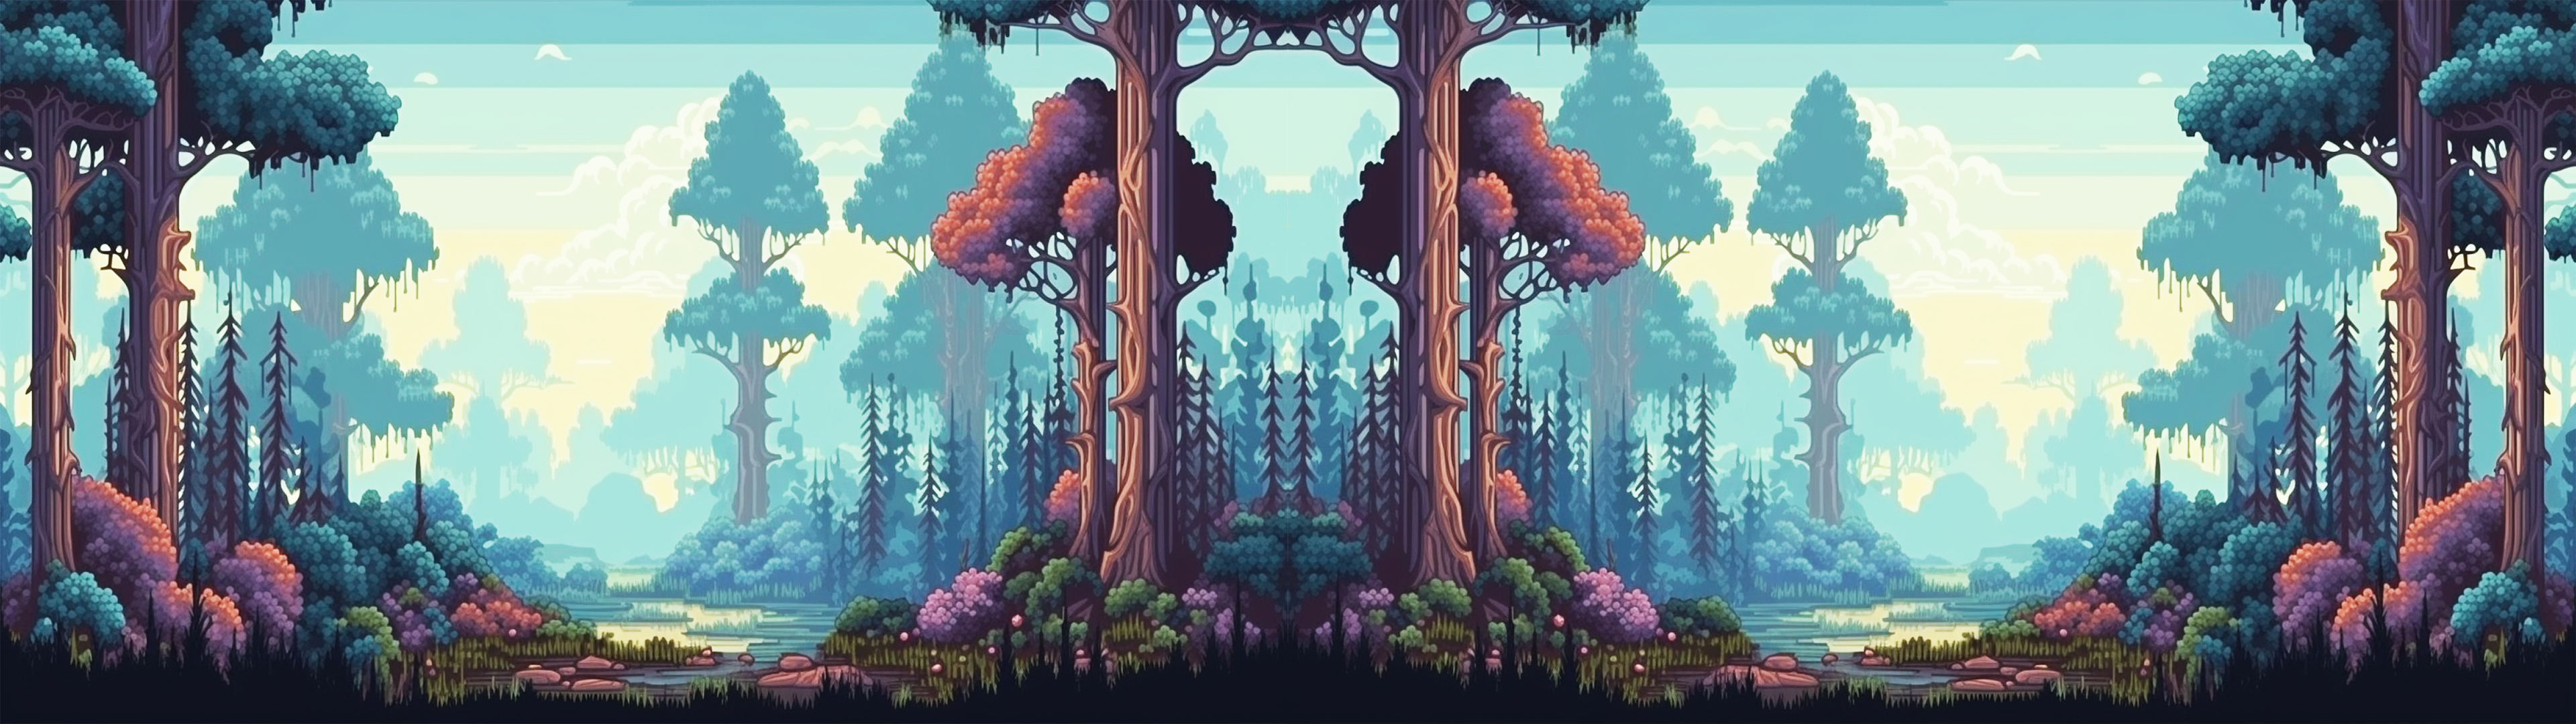 Magical Forest With Tall Trees Tile Background